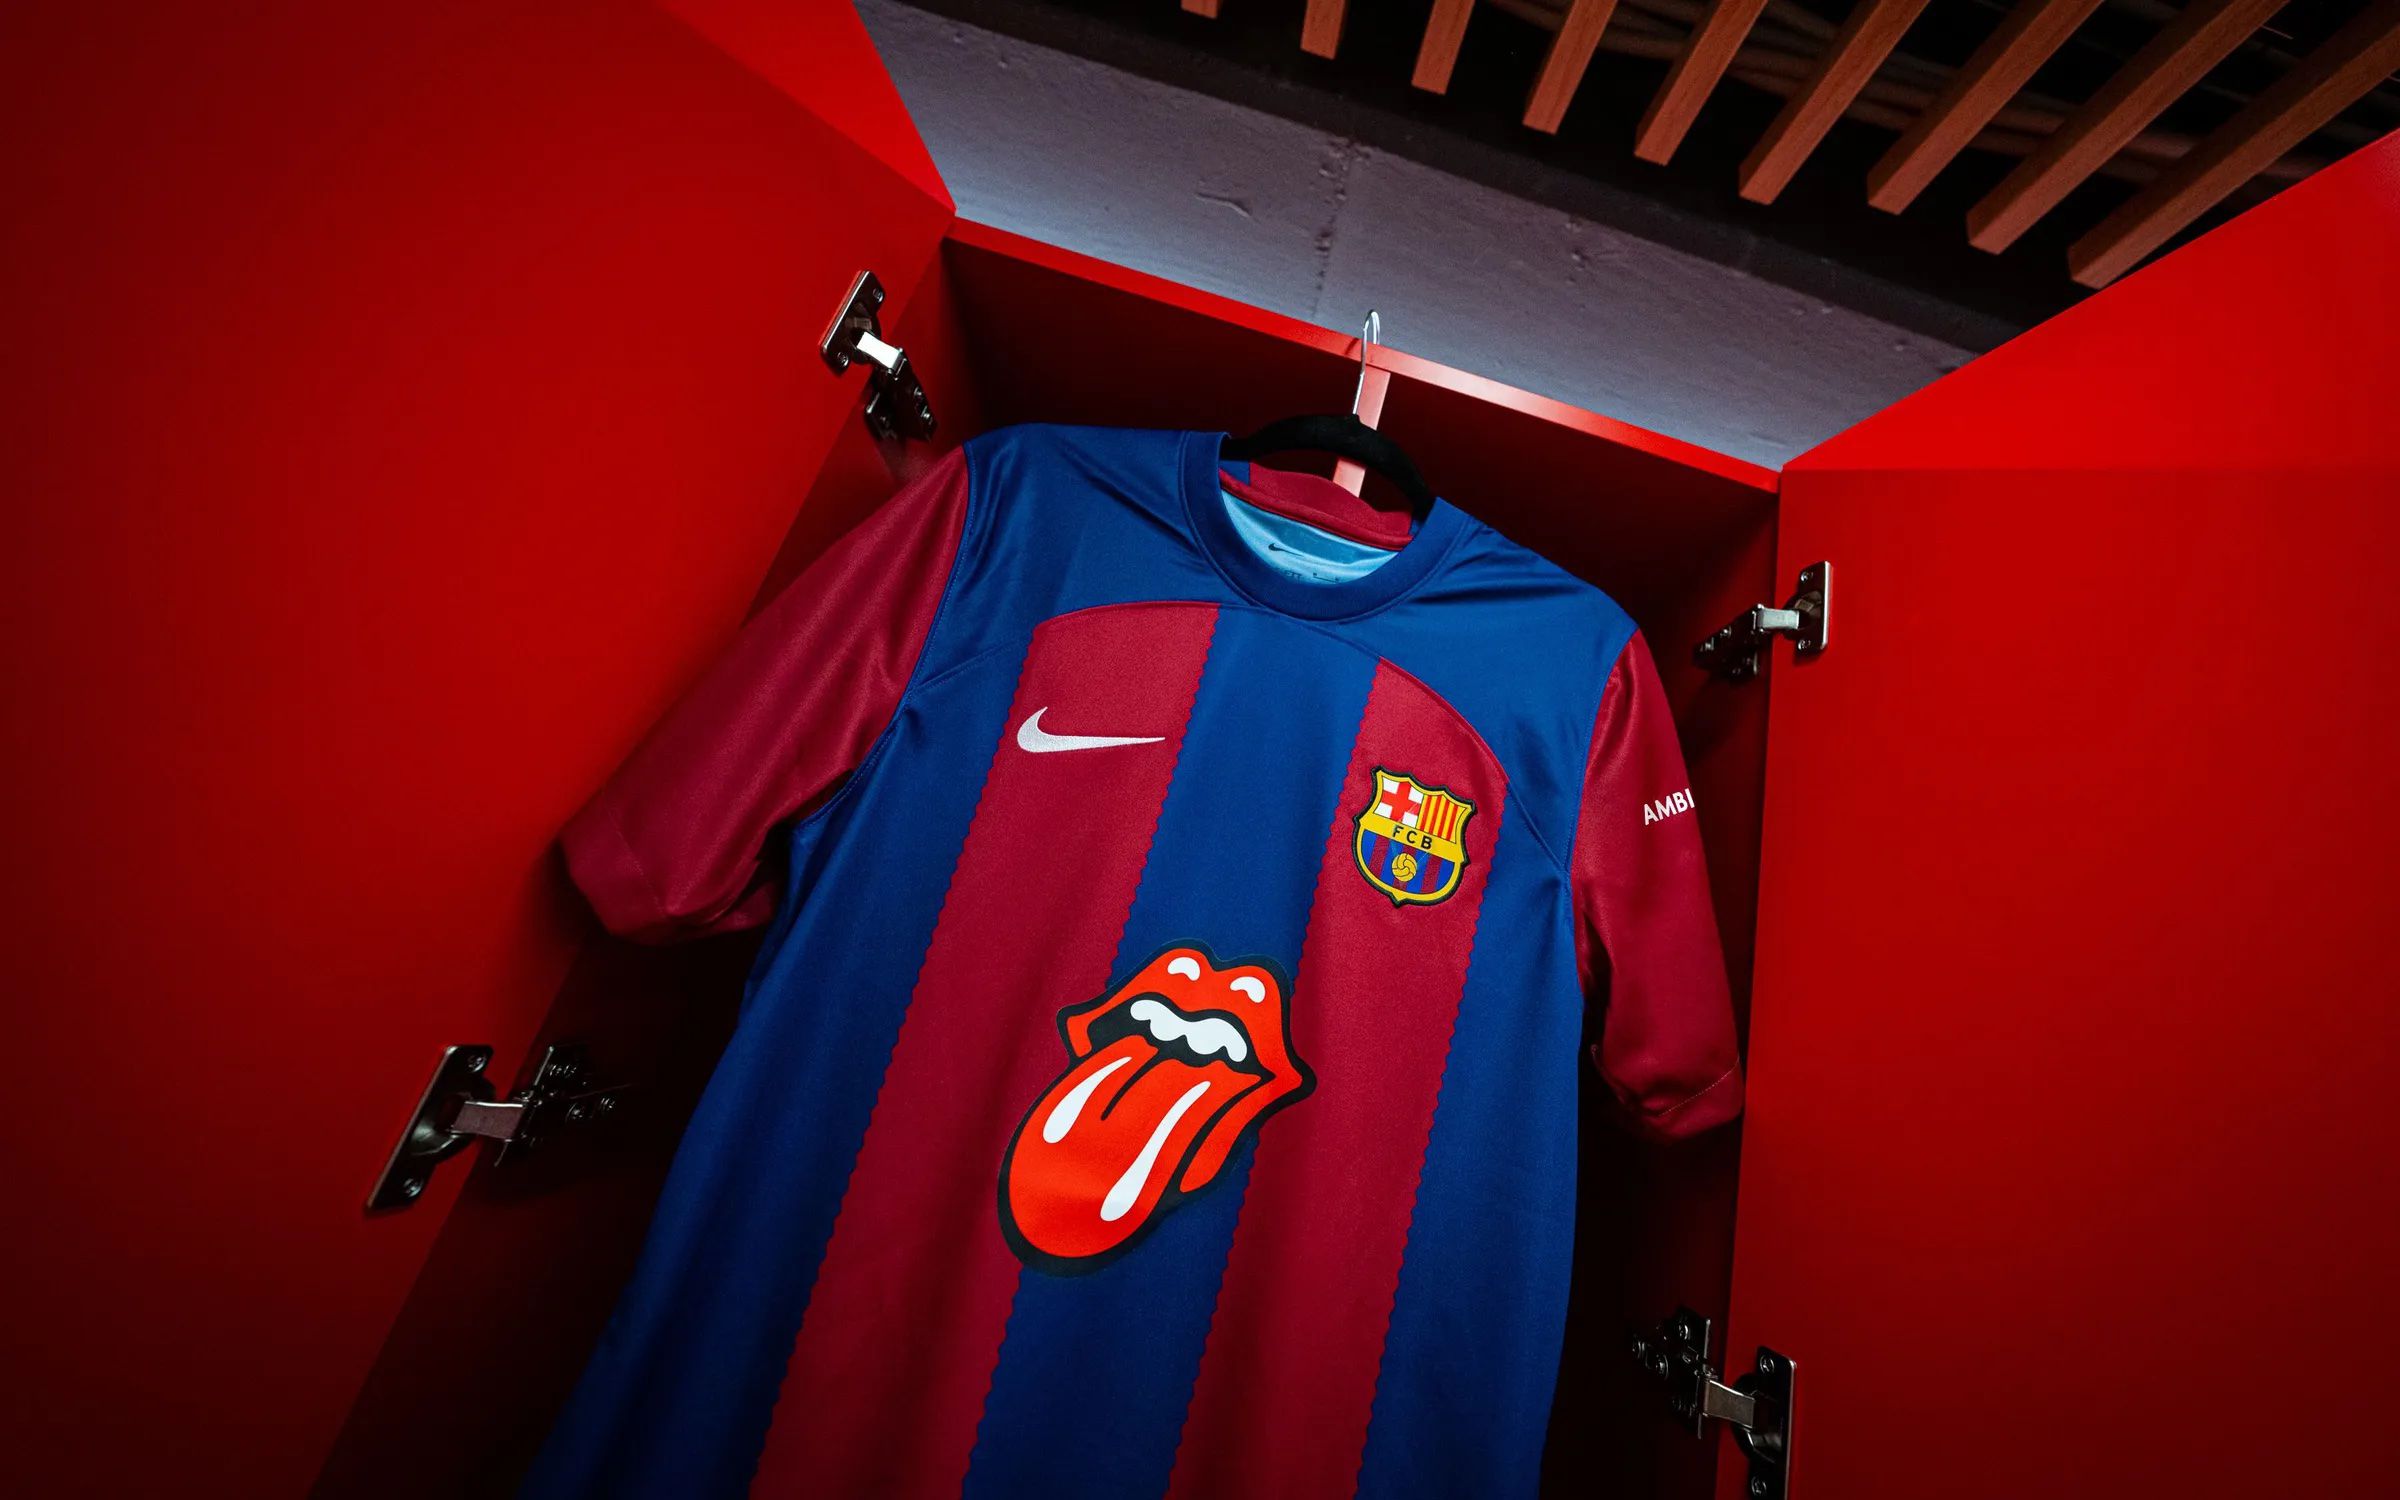 A photo of the FC Barcelona jersey with a Rolling Stones logo as the sponsor.